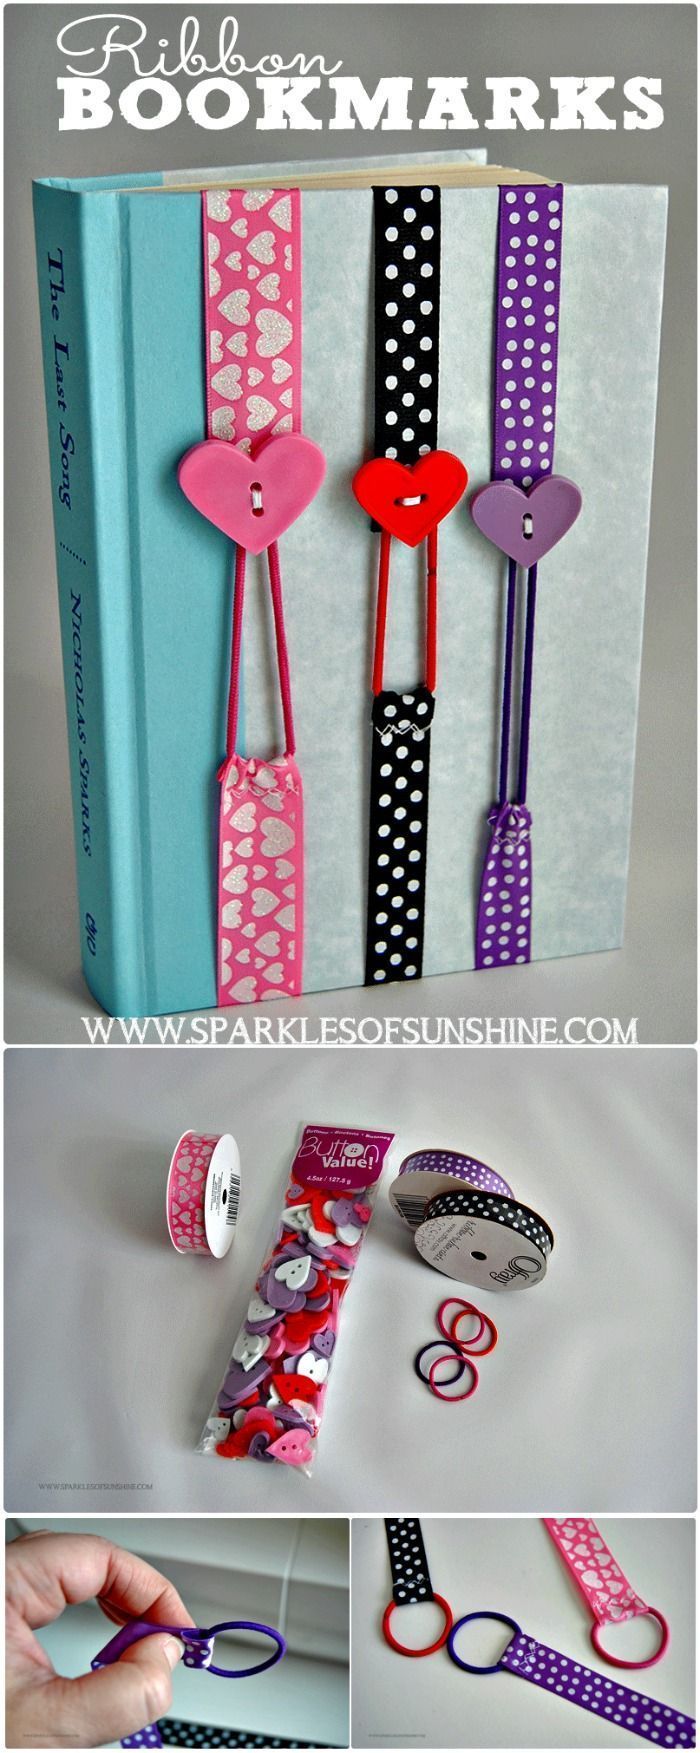 240 Easy Crafts to Make and Sell – DIY Craft Ideas -   18 fabric crafts Easy gifts ideas